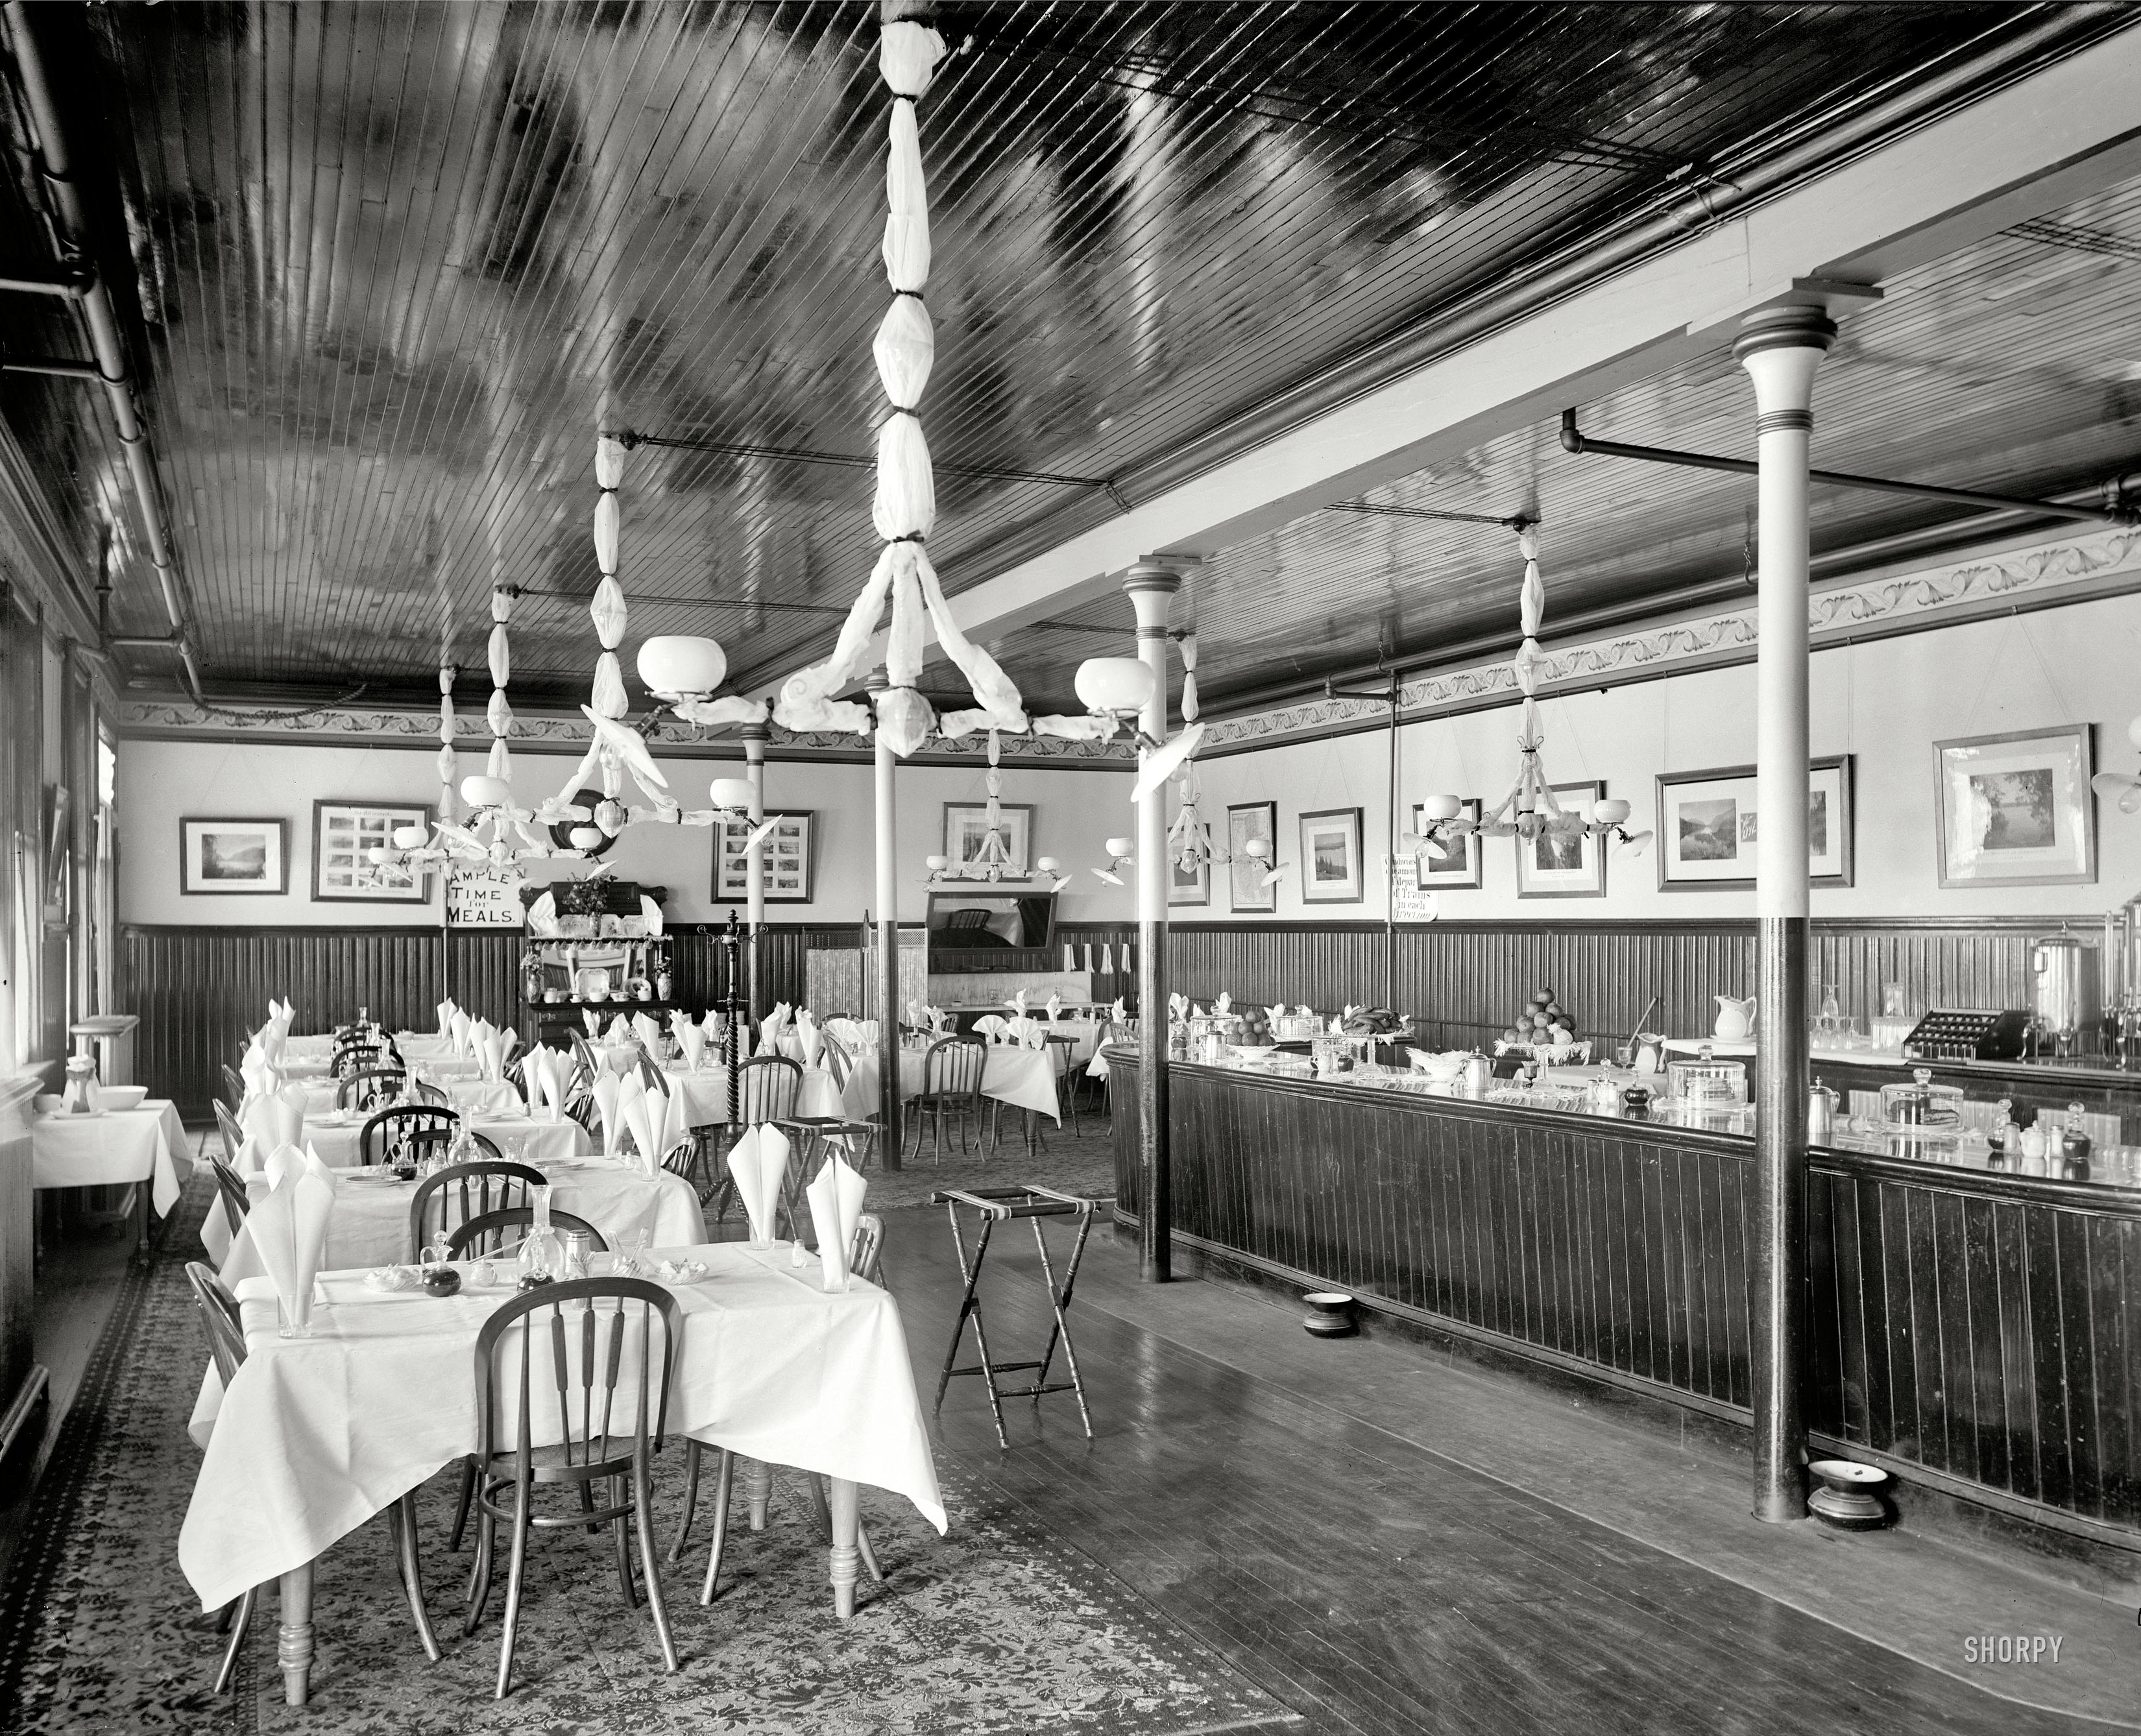 Circa 1900. "New York Central R.R. dining room." Full of high-class touches.  8x10 inch glass negative, Detroit Publishing Company. View full size.